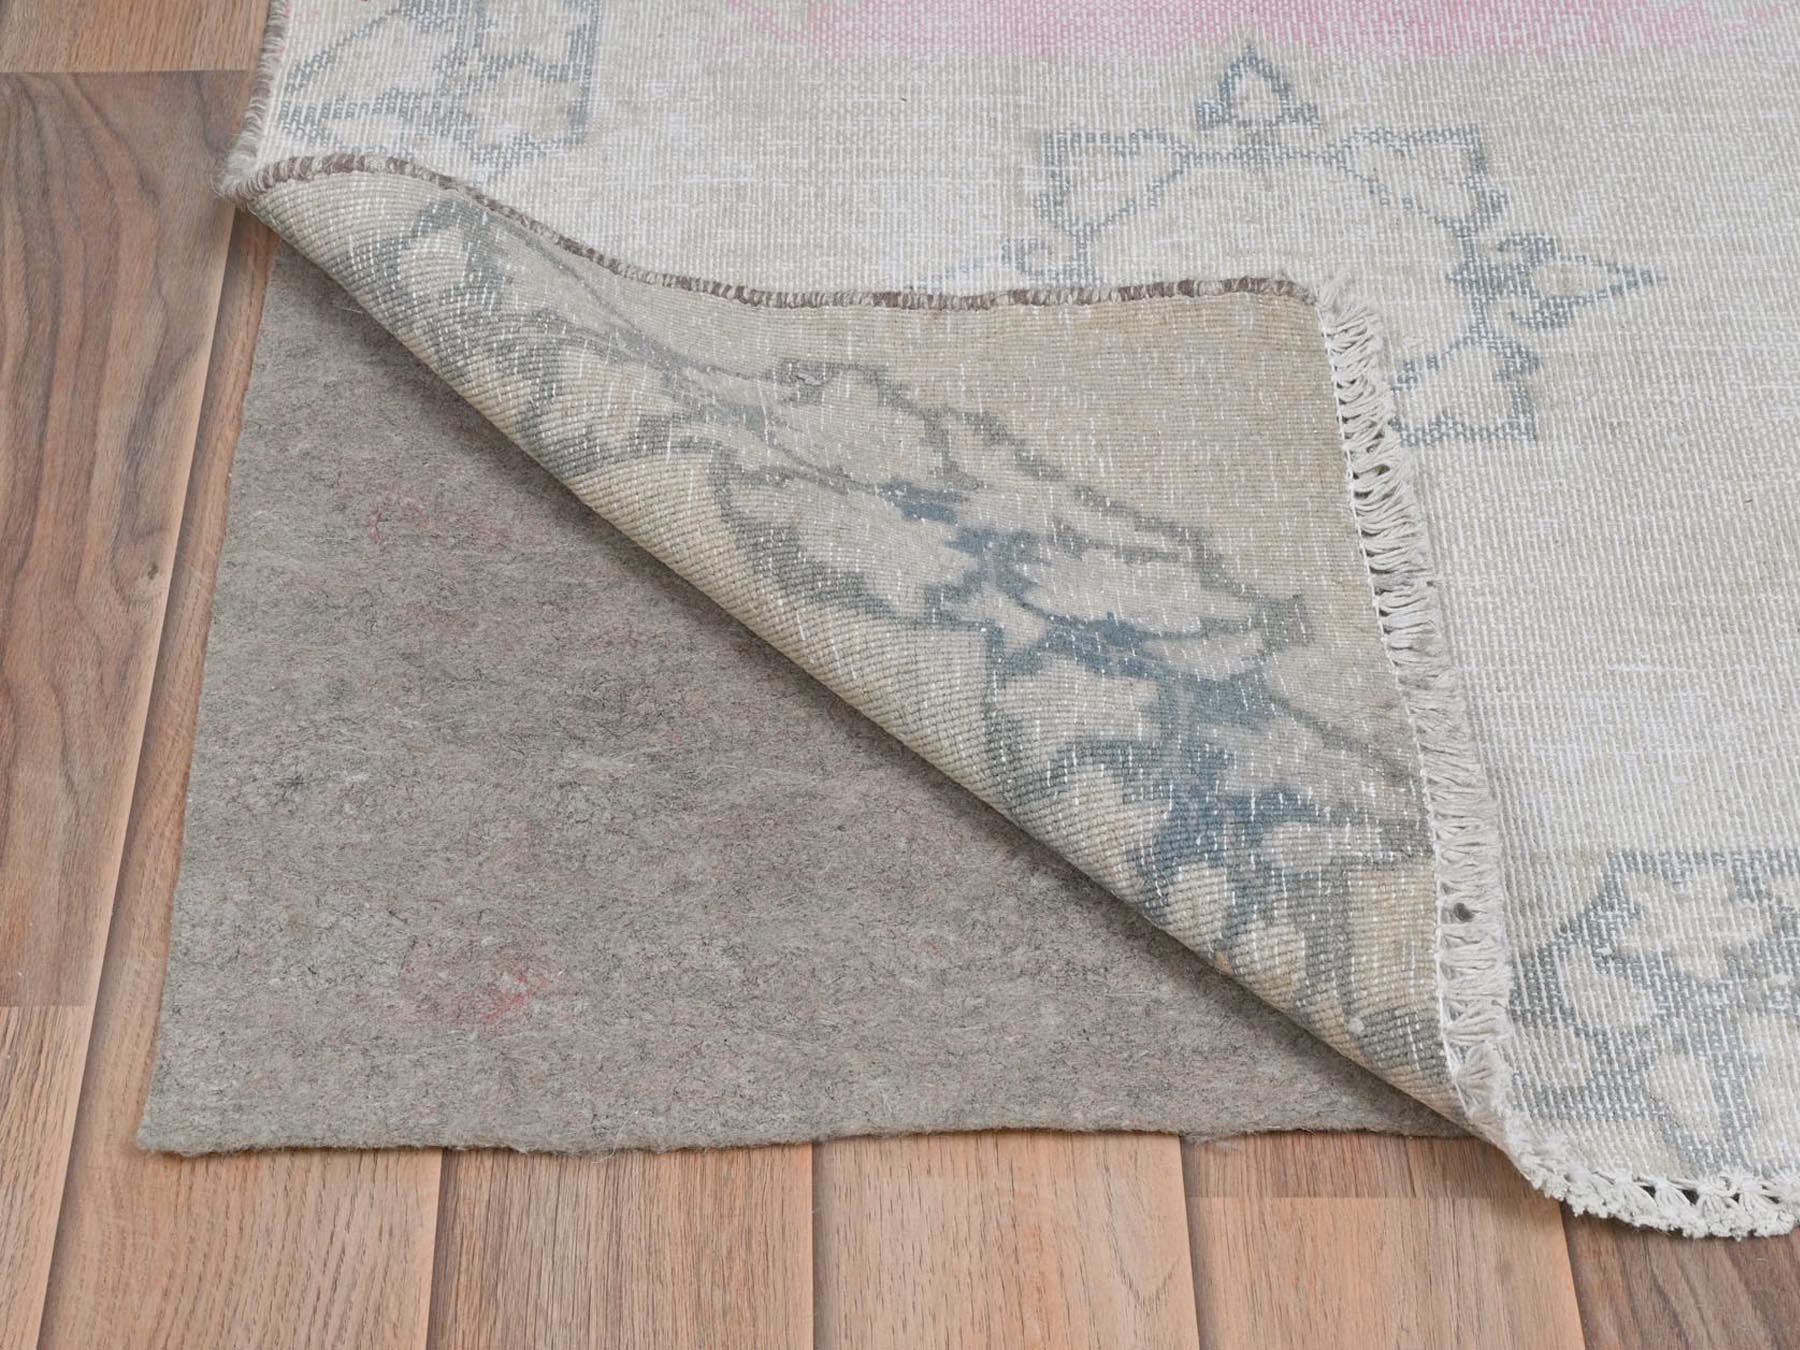 Overdyed & Vintage Rugs LUV737703